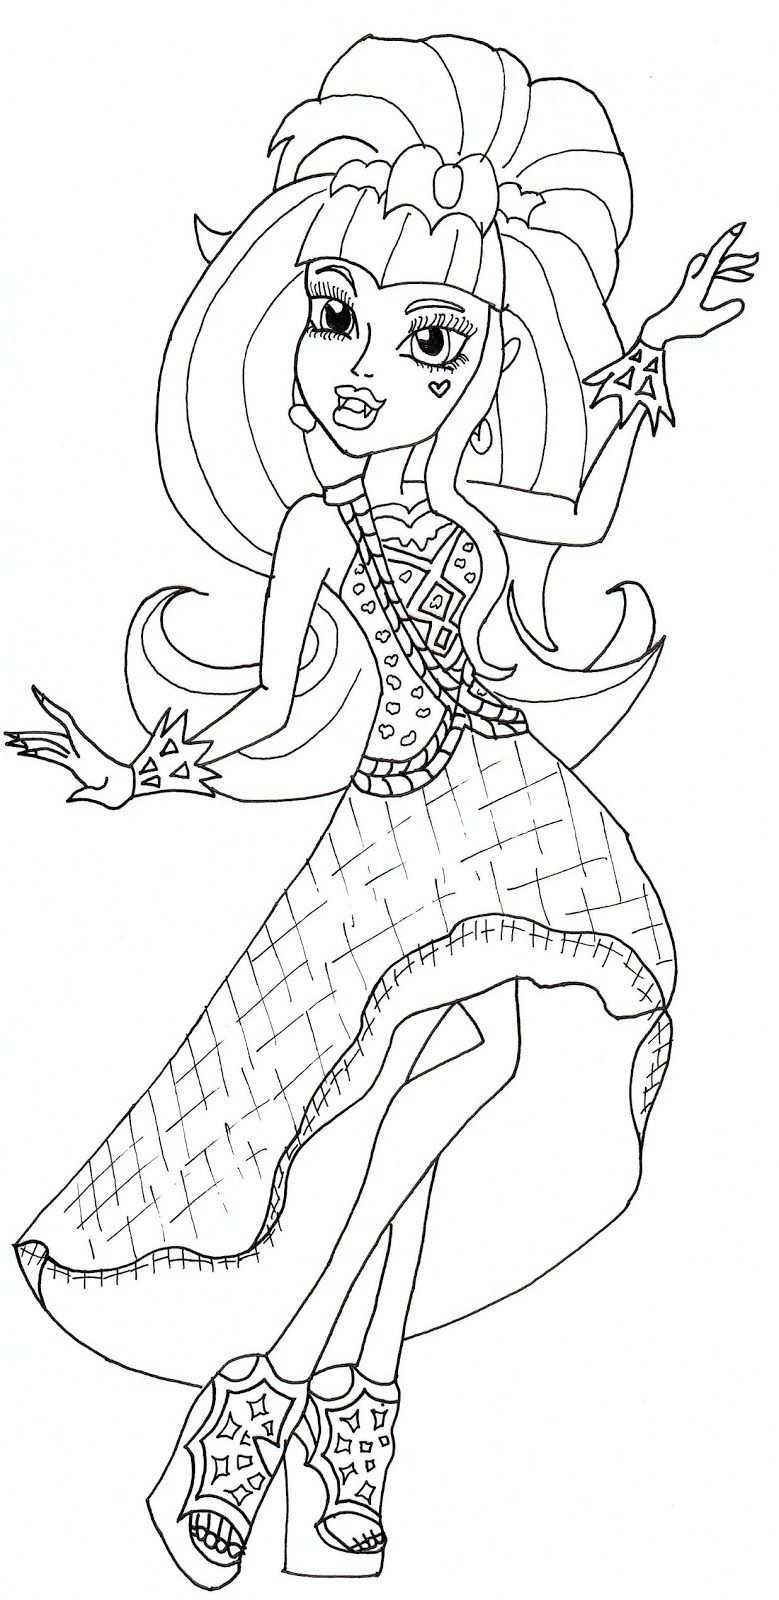 Free Printable Monster High Coloring Pages Draculaura 13 Wishes Coloring Page Monster